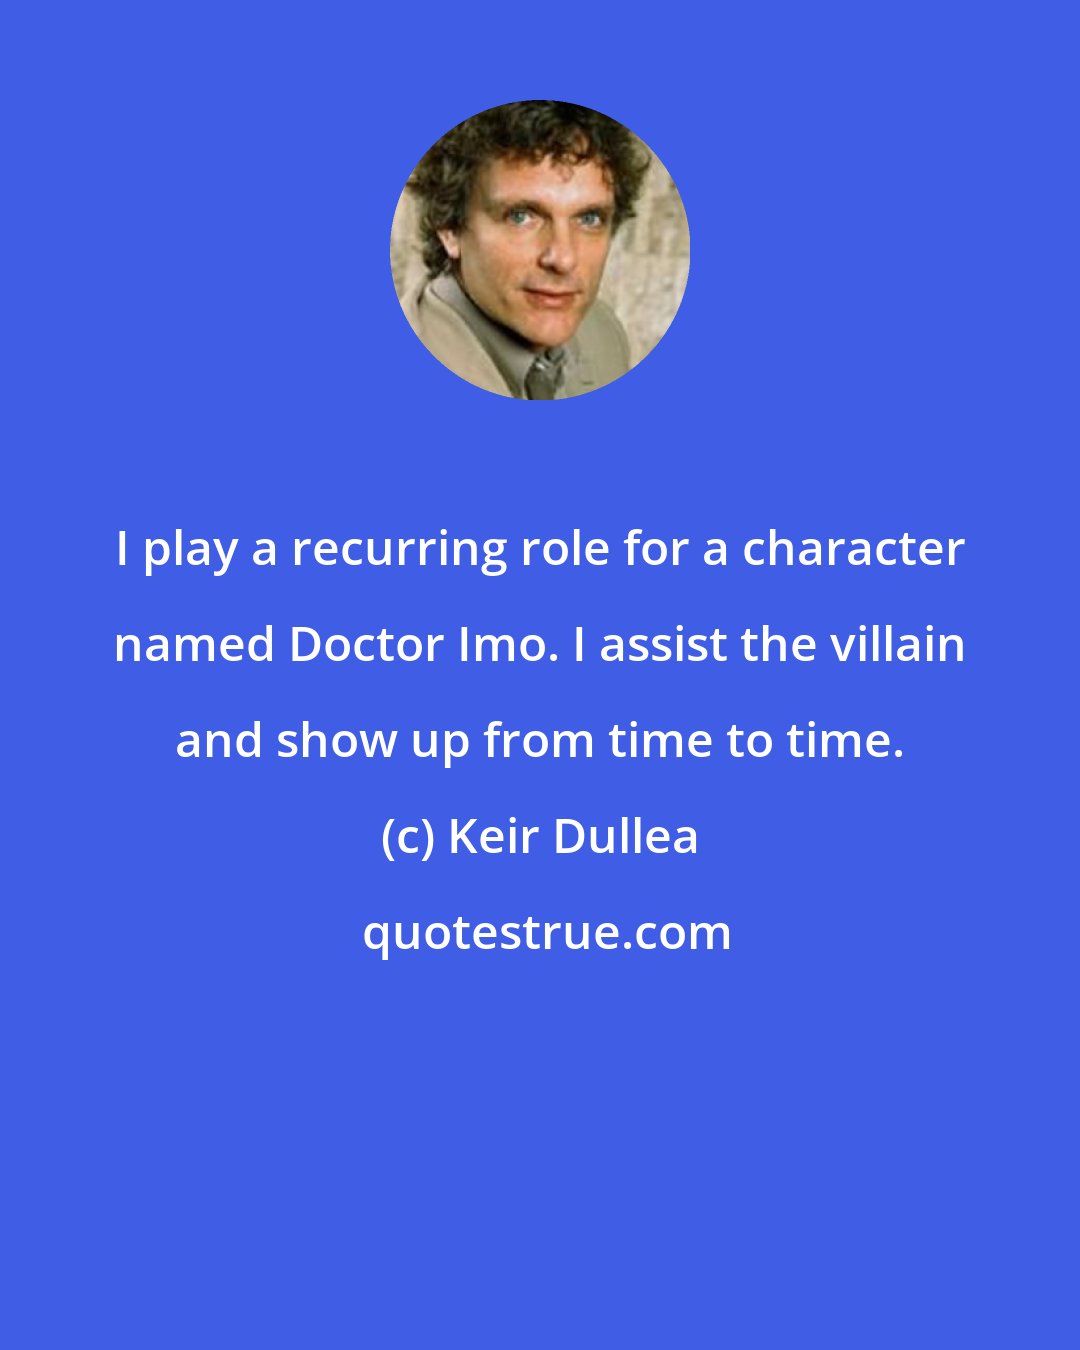 Keir Dullea: I play a recurring role for a character named Doctor Imo. I assist the villain and show up from time to time.